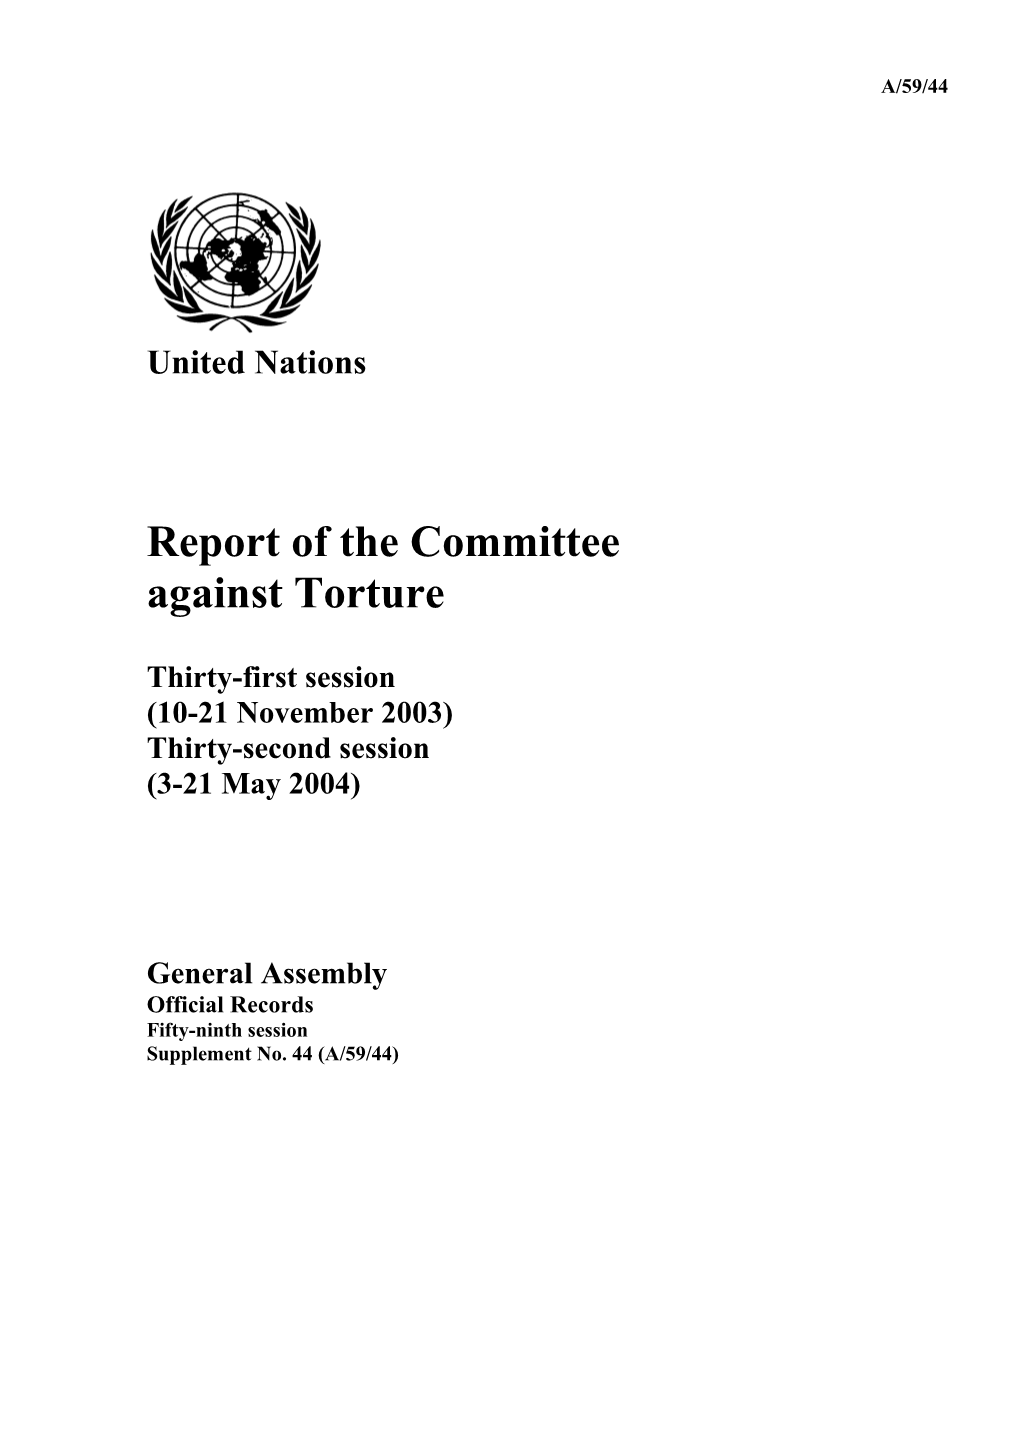 Report of the Committee Against Torture